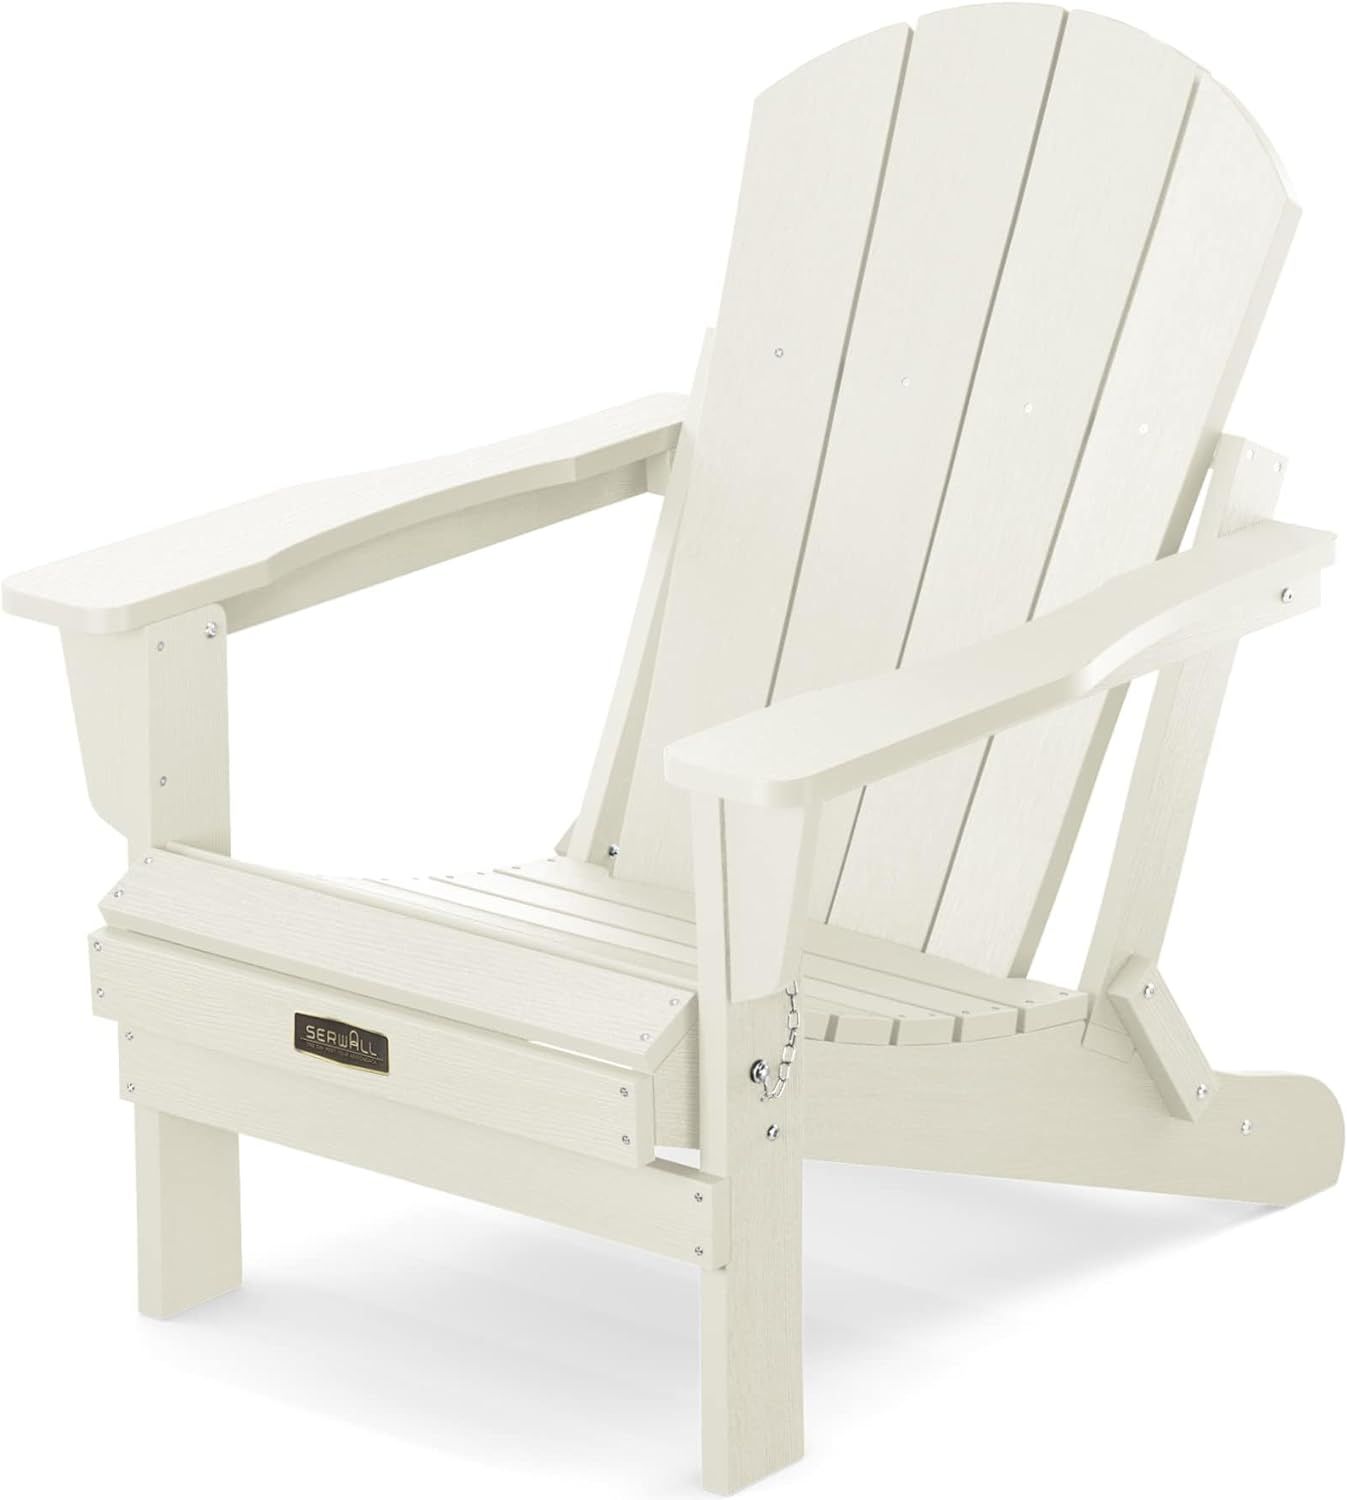 SERWALL Folding Adirondack Chair - HIPS Adirondack Chairs Outdoor Chairs Weather Resistant- White | Amazon (US)